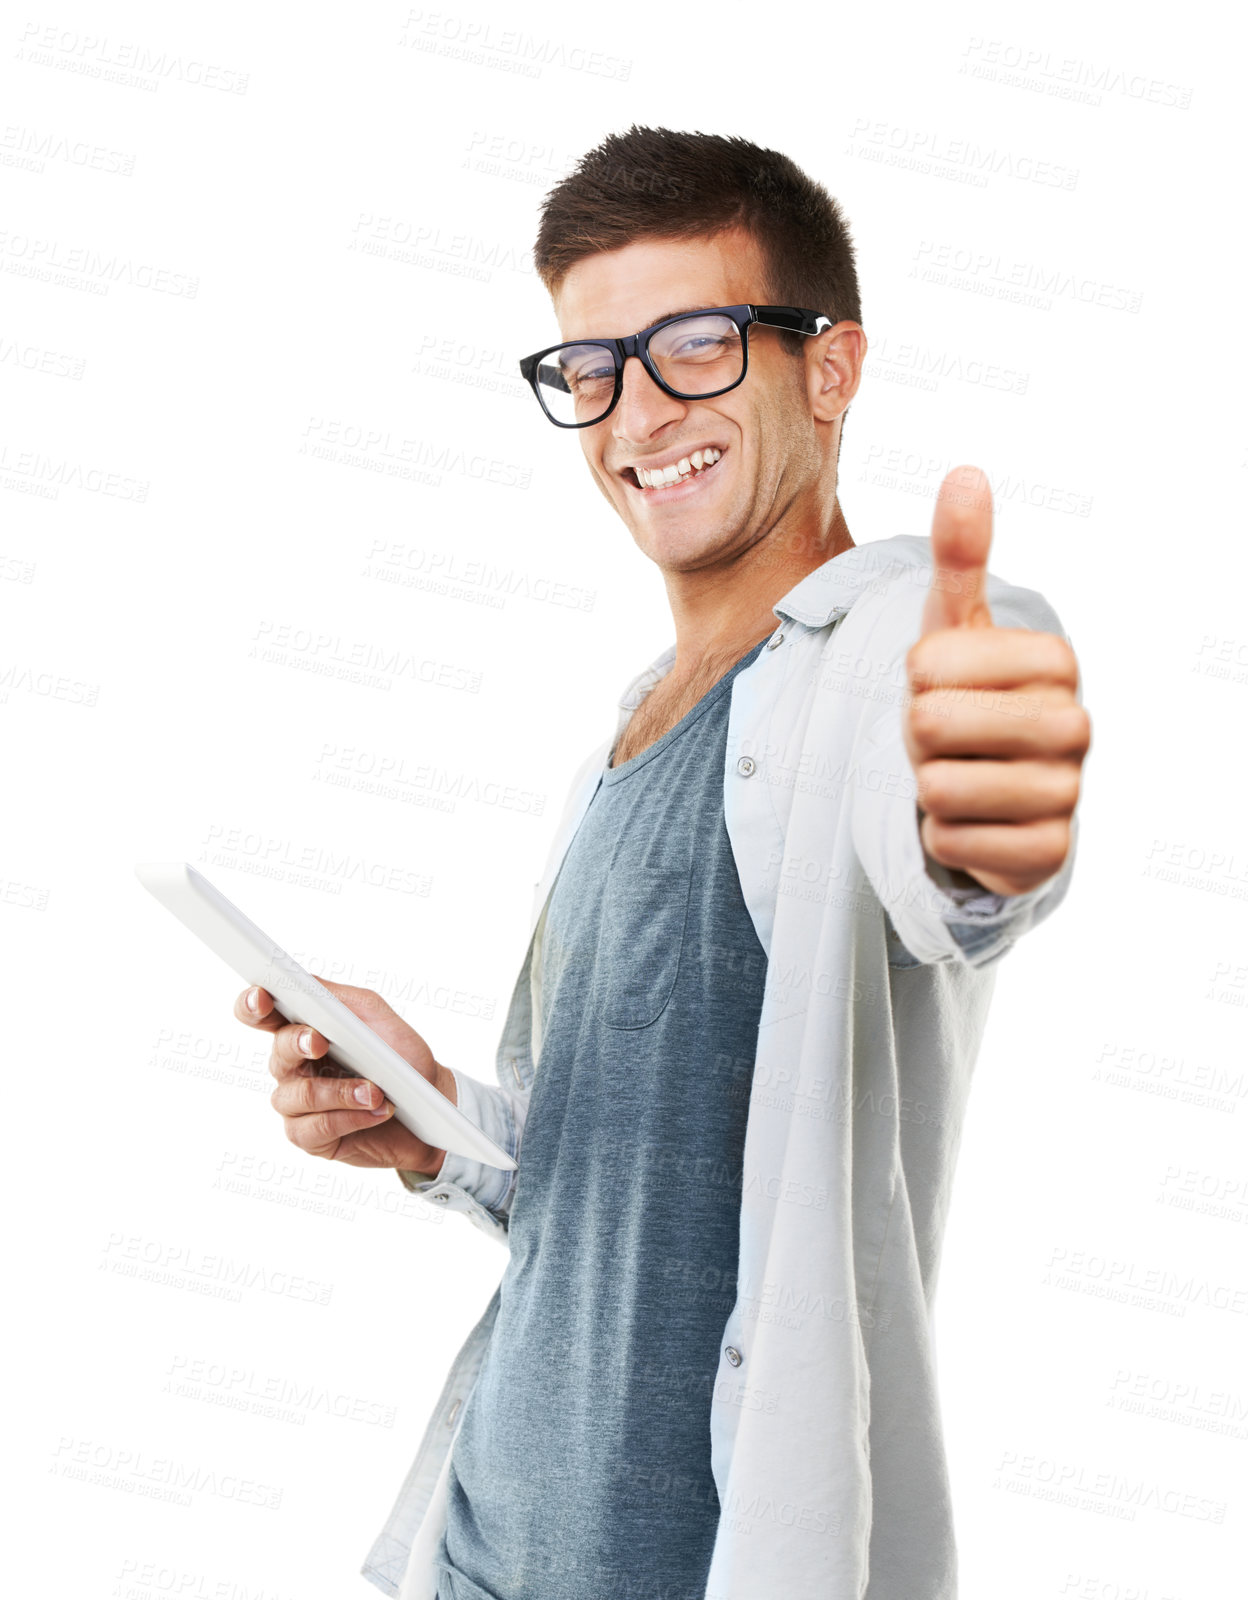 Buy stock photo Portrait of a smiling man with glasses with thumbs up and holding a touch screen